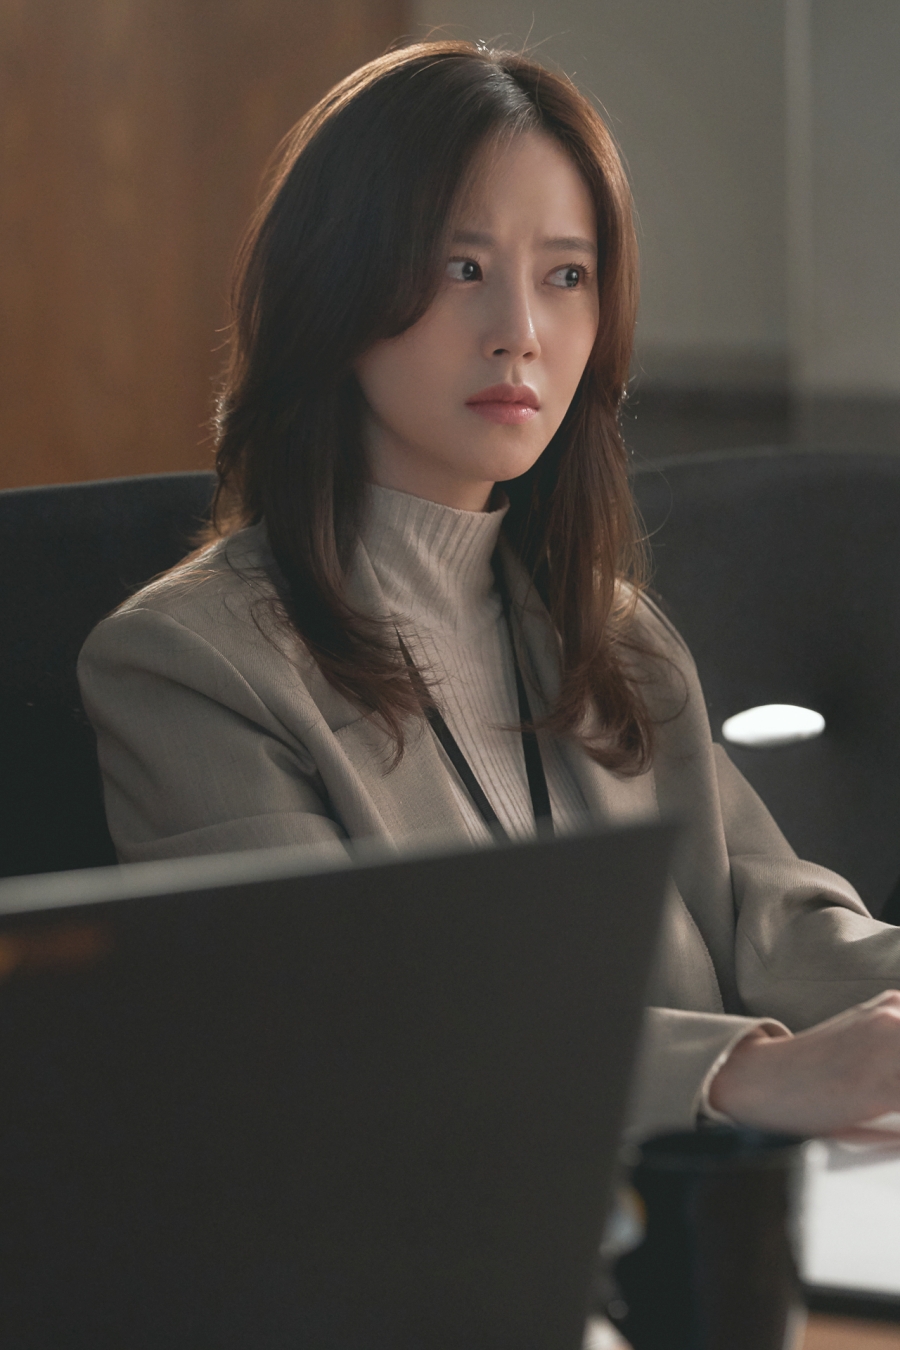 TVN tree Drama Flower of Evil took the beauty of Liu Cong.What if my husband, who has been in love for 14 years, is suspected of being a serial killer?The Flower of Evil, which was illuminated by the return of the CRT by Actor Moon Chae-won, who believes and believes in the same time as throwing the topic of, met the expectations of many people until the end and decorated the colorful finale.At the center of the work was Moon Chae-won, who successfully completed his return in about two years.He made the actor feel the power of assimilation of Feeling by unfolding his hot streak as a criminal car support for the homicide detective who traces her husbands secret reality.From feeling anxiety due to sudden suspicion in a calm daily life to a sad love that can not be abandoned.As in the tightrope of the breathtaking Feeling, Moon Chae-won drew the viewers to the front of the screen by immersing the Feeling change of the complex character with his own acting ability.Q. In an online production presentation prior to the broadcast of Flower of Evil, I said, I am nervous because I want to do it. What is the impression that the end is?A. I think it is a work that has been more affectionate than ever before, and I wanted to express the role of car support and his Feeling as true as possible as I was affectionate.So there was a difficult and difficult process, but as a result, I am satisfied that it will be a Seo Bo-ram work with my best efforts.I am grateful to all the staff and colleagues, but especially for coach Kim Chul-kyu, I was very grateful for the film. When the director hugged me after all the filming, I cried a lot.Q. The Carpenter setting of carpenters, which directly traces the secret reality of a husband he loved for 14 years, is unique. What kind of carpenter was Moon Chae-won thinking?And what if there is a special emphasis on preparing or acting to digest the character?A. I think the support is not different from the outside, but I think it is someone who is honest with his Feeling and knows the importance of people too well.So I think I tried to be a support person in the preparation process. I focused on expressing the truth of support.A. I wanted to show you the same thing as before, that is, the unique essence that does not change as an actor, and I wanted to show you a new look.Its like a little more mature than Li Dian, and a skillful story-telling ability. Im sure youd be really happy to see this in me.Q. Did you ever experience the hot reaction to Drama and Character, such as renewing the highest audience rating in the second half of the broadcast?A. I felt that many people loved Drama in comments and real-time reactions, but it seems to have come to a bigger point when I saw fans cheering and comments.I was really grateful that the warm support of the fans was a tremendous force.A. From the planning stage, support was expected to be difficult because it was said to be feeling changes like roller coasters. Haha.However, when I played it, it was difficult and difficult several times more than I imagined.The Feeling change experienced by support was more dynamic, and it should be understandable when viewers see it, because they were worried about how to express it.As a result of this constant effort, good scenes were born and proud.Q. In behind-the-scenes making videos, many of them were recounted several times, and there were many comments that they had rehearsed and that they had completely digested the character.What do you think about this?A. I wanted to get the full flow or the characters mind as far as I could, so I could see more scripts than ever, so I could be more immersed in support.Thanks to this, I am grateful that you gave me a good evaluation of acting.A. Lee Joon-gi is outgoing and I am introverted, and of course, sometimes I am outgoing, but we have a slight difference in personality.Nevertheless, his breathing with Jun Ki was always good. Jun Ki was a good partner, so he could get a lot of energy from the bright energy he gave on the set.It seems that this work has become a little more familiar than Li Dian.Q. What if you consider the episodes left in Memory at the scene of Flower of Evil or the episodes or scenes left in Memory in Drama?A. The senior and junior members who worked with their colleagues at the Kangsu Police Station are very exciting and interesting, so I enjoyed every moment I acted together.Especially, there were a few moments when I started to make NG by bursting into a ridiculous and ridiculous scene that was so small that it was not left in Memory. Sometimes I remember it and laugh alone.A. I think I will live happily. I have to have no more pain or sadness for Suspension and Support.Q. From the spring of flowers to the autumn when cool winds blow, the three seasons were accompanied by flowers of evil.I wonder what meaning flower of evil is to Moon Chae-won and what it seems to be remembered as a work.A. I think I had a long dream of feeling good while shooting Flower of Evil. It seems to be a work that felt a lot of warm temperature and human smell that I felt for good people for a long time.Q. Finally, I would like to ask those who love Flower of Evil.A. Thank you for loving the Flower of Evil so far, and I think you can feel the bigger Seo Bo-ram thanks to the many loves you have sent.